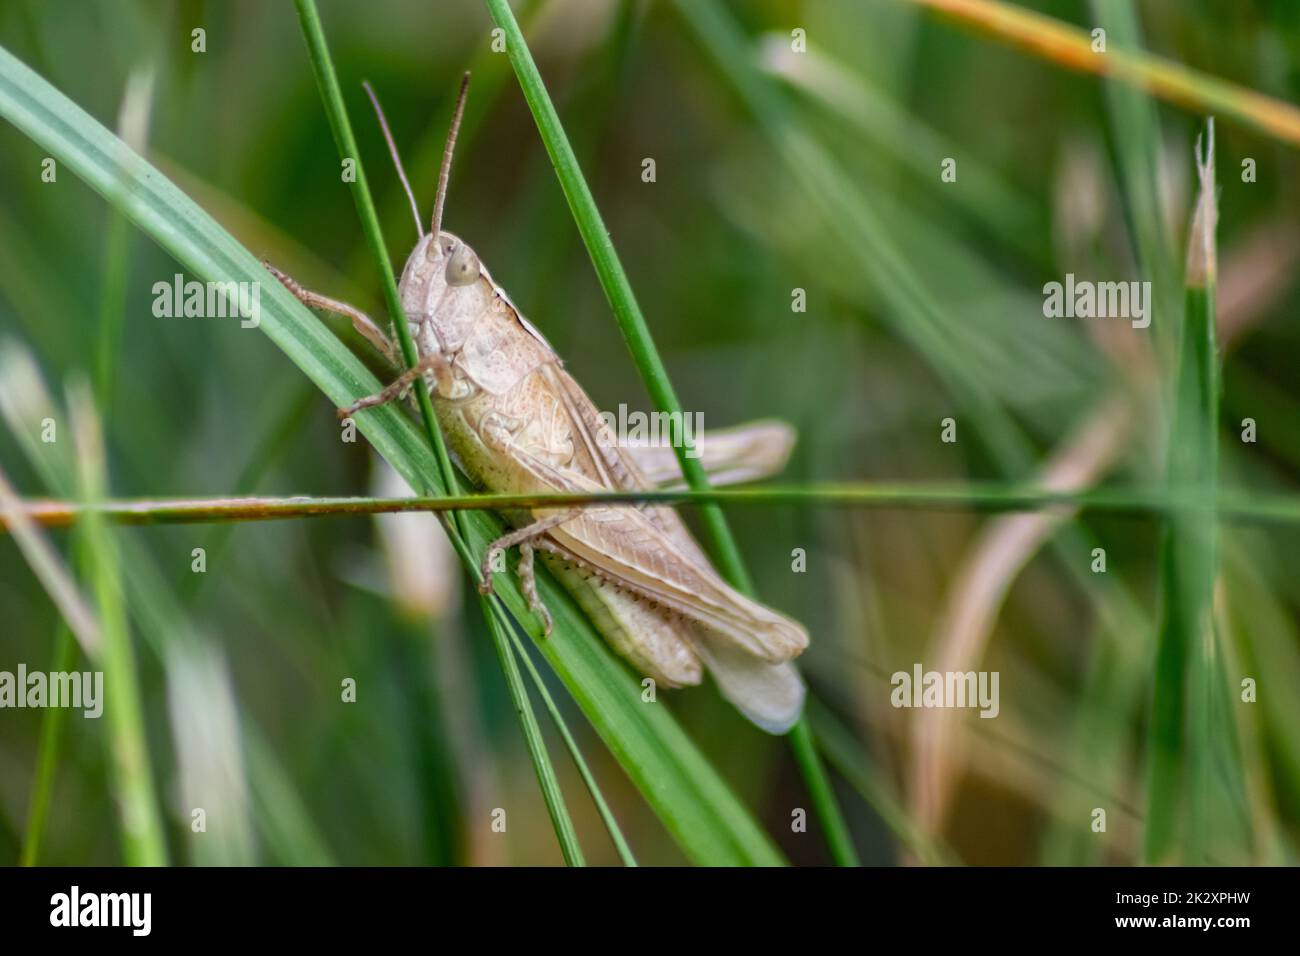 Single isolated grasshopper hopping through the grass in search of food, grass, leafs and plants as plague with copy space and a blurred background as future food finger food for economic nutrition Stock Photo